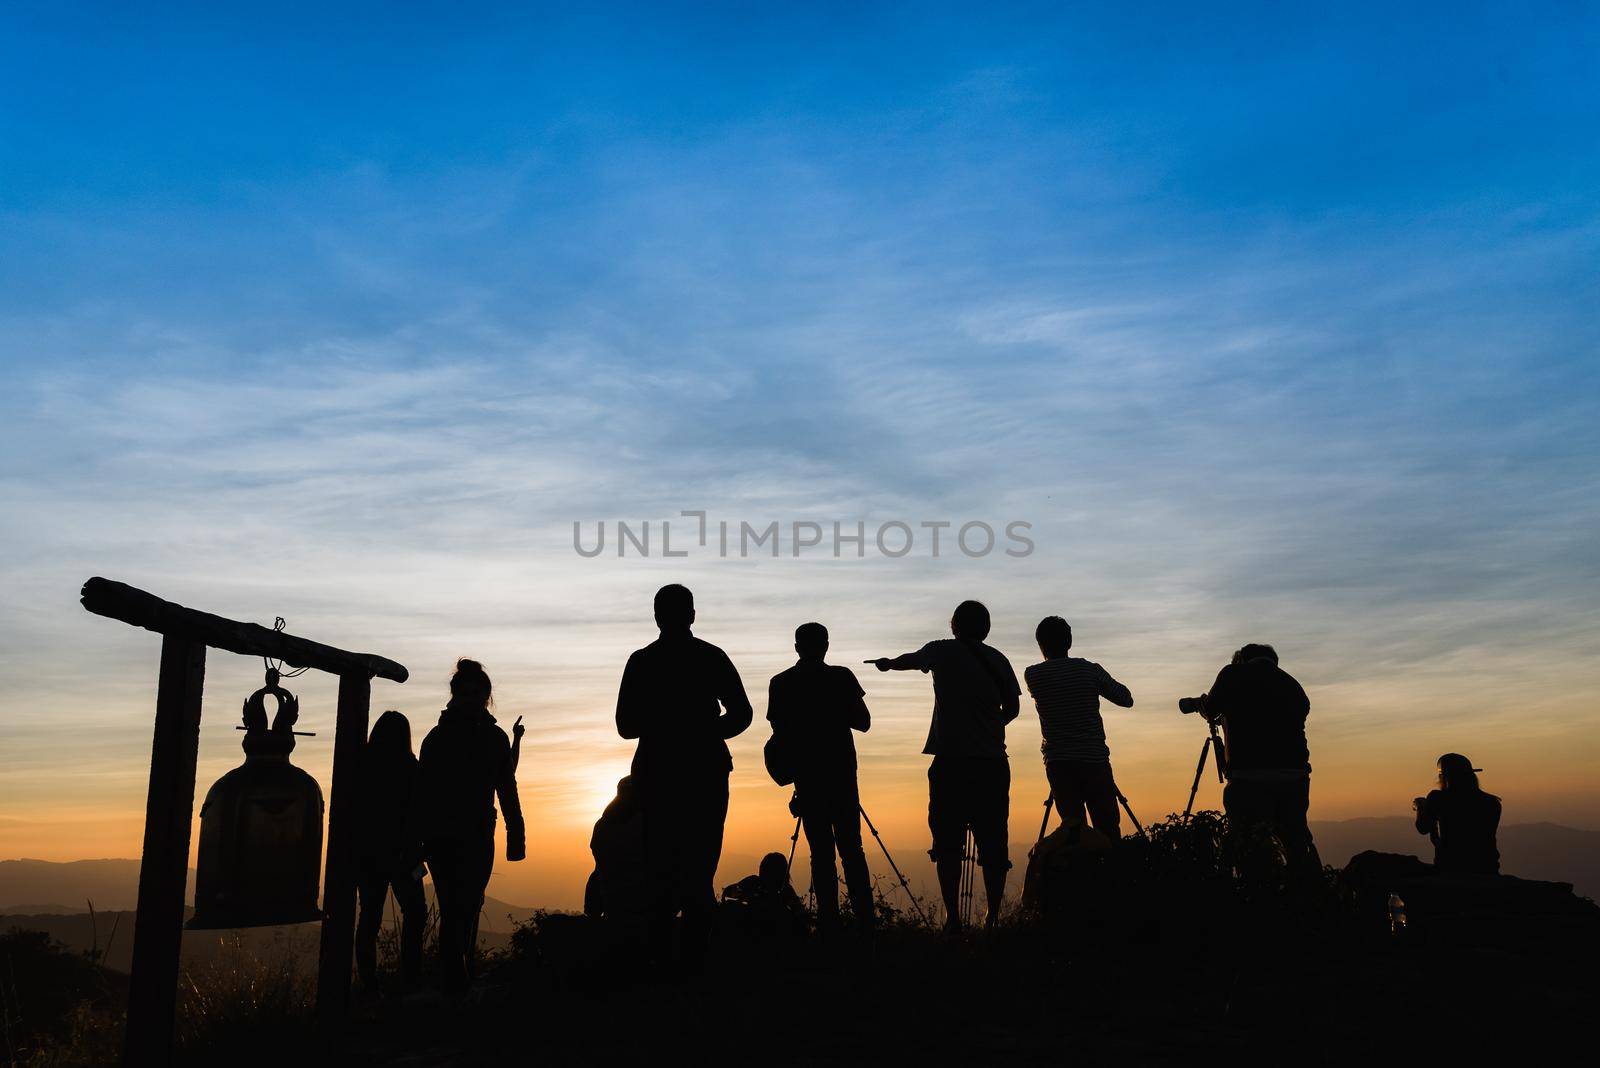 Photographers Silhouettes On Cliff Against Colorful Twilight Sky